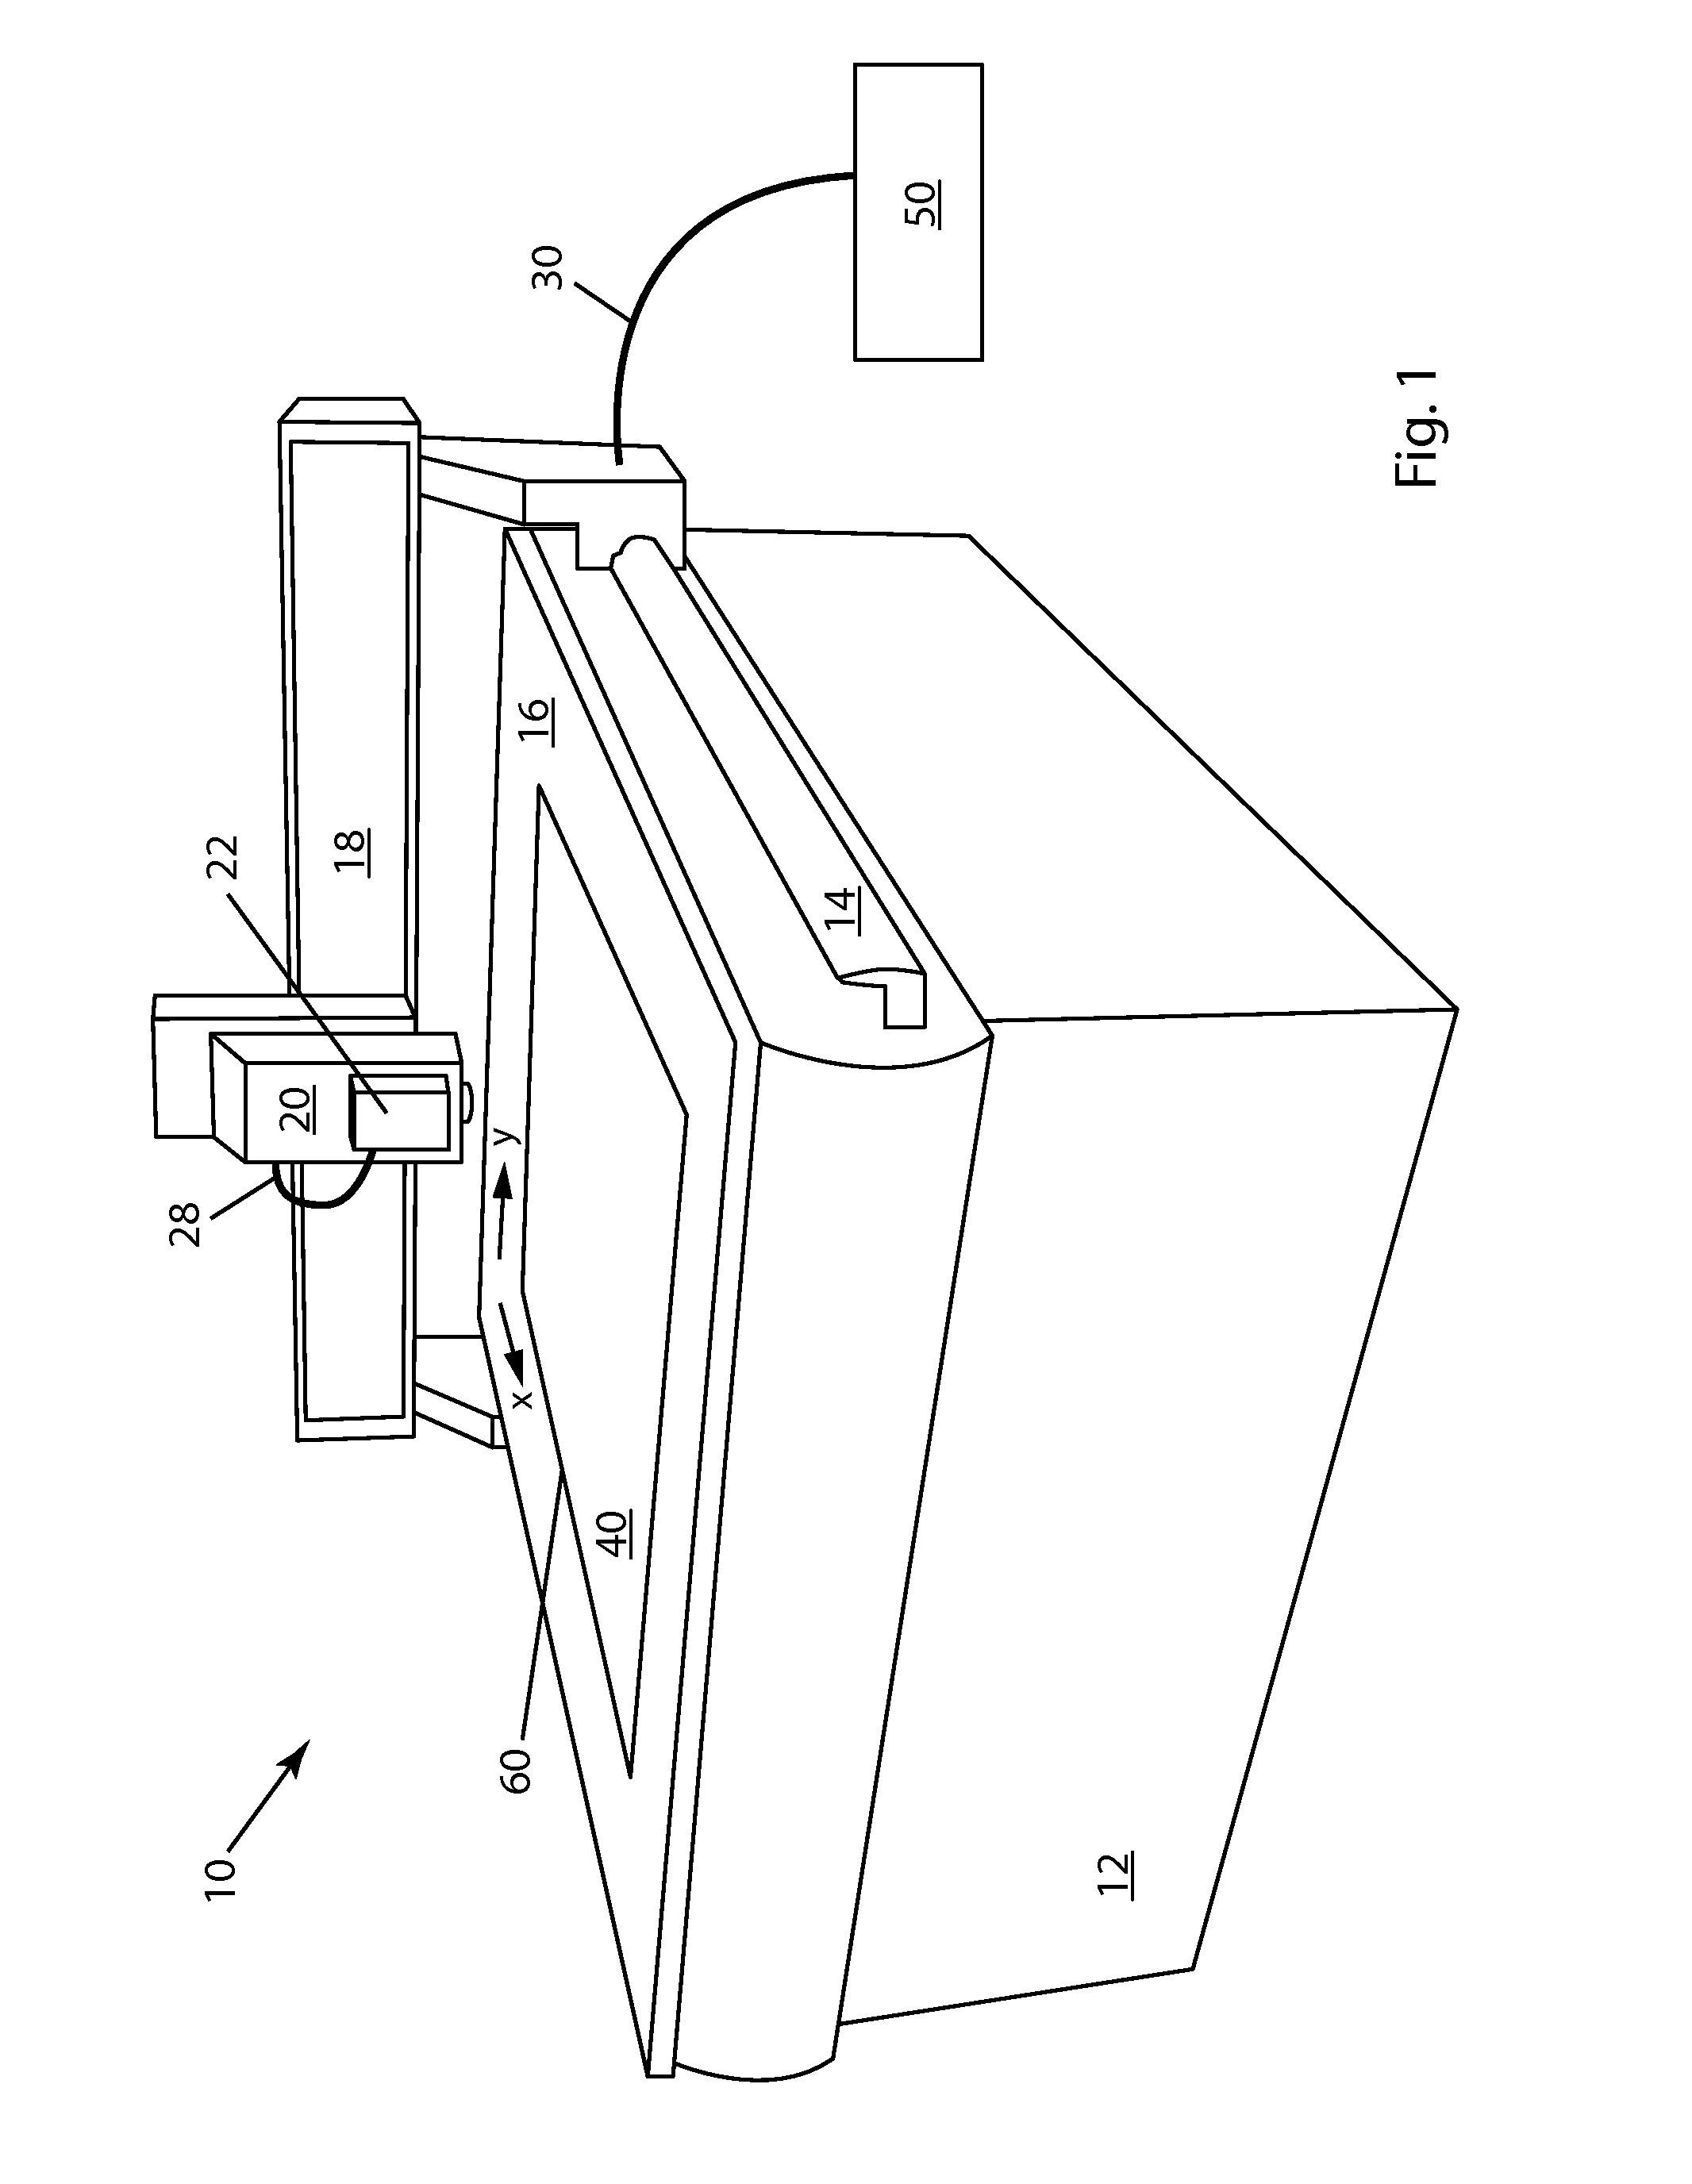 Adaptive Registration During Precision Graphics Cutting from Multiple Sheets